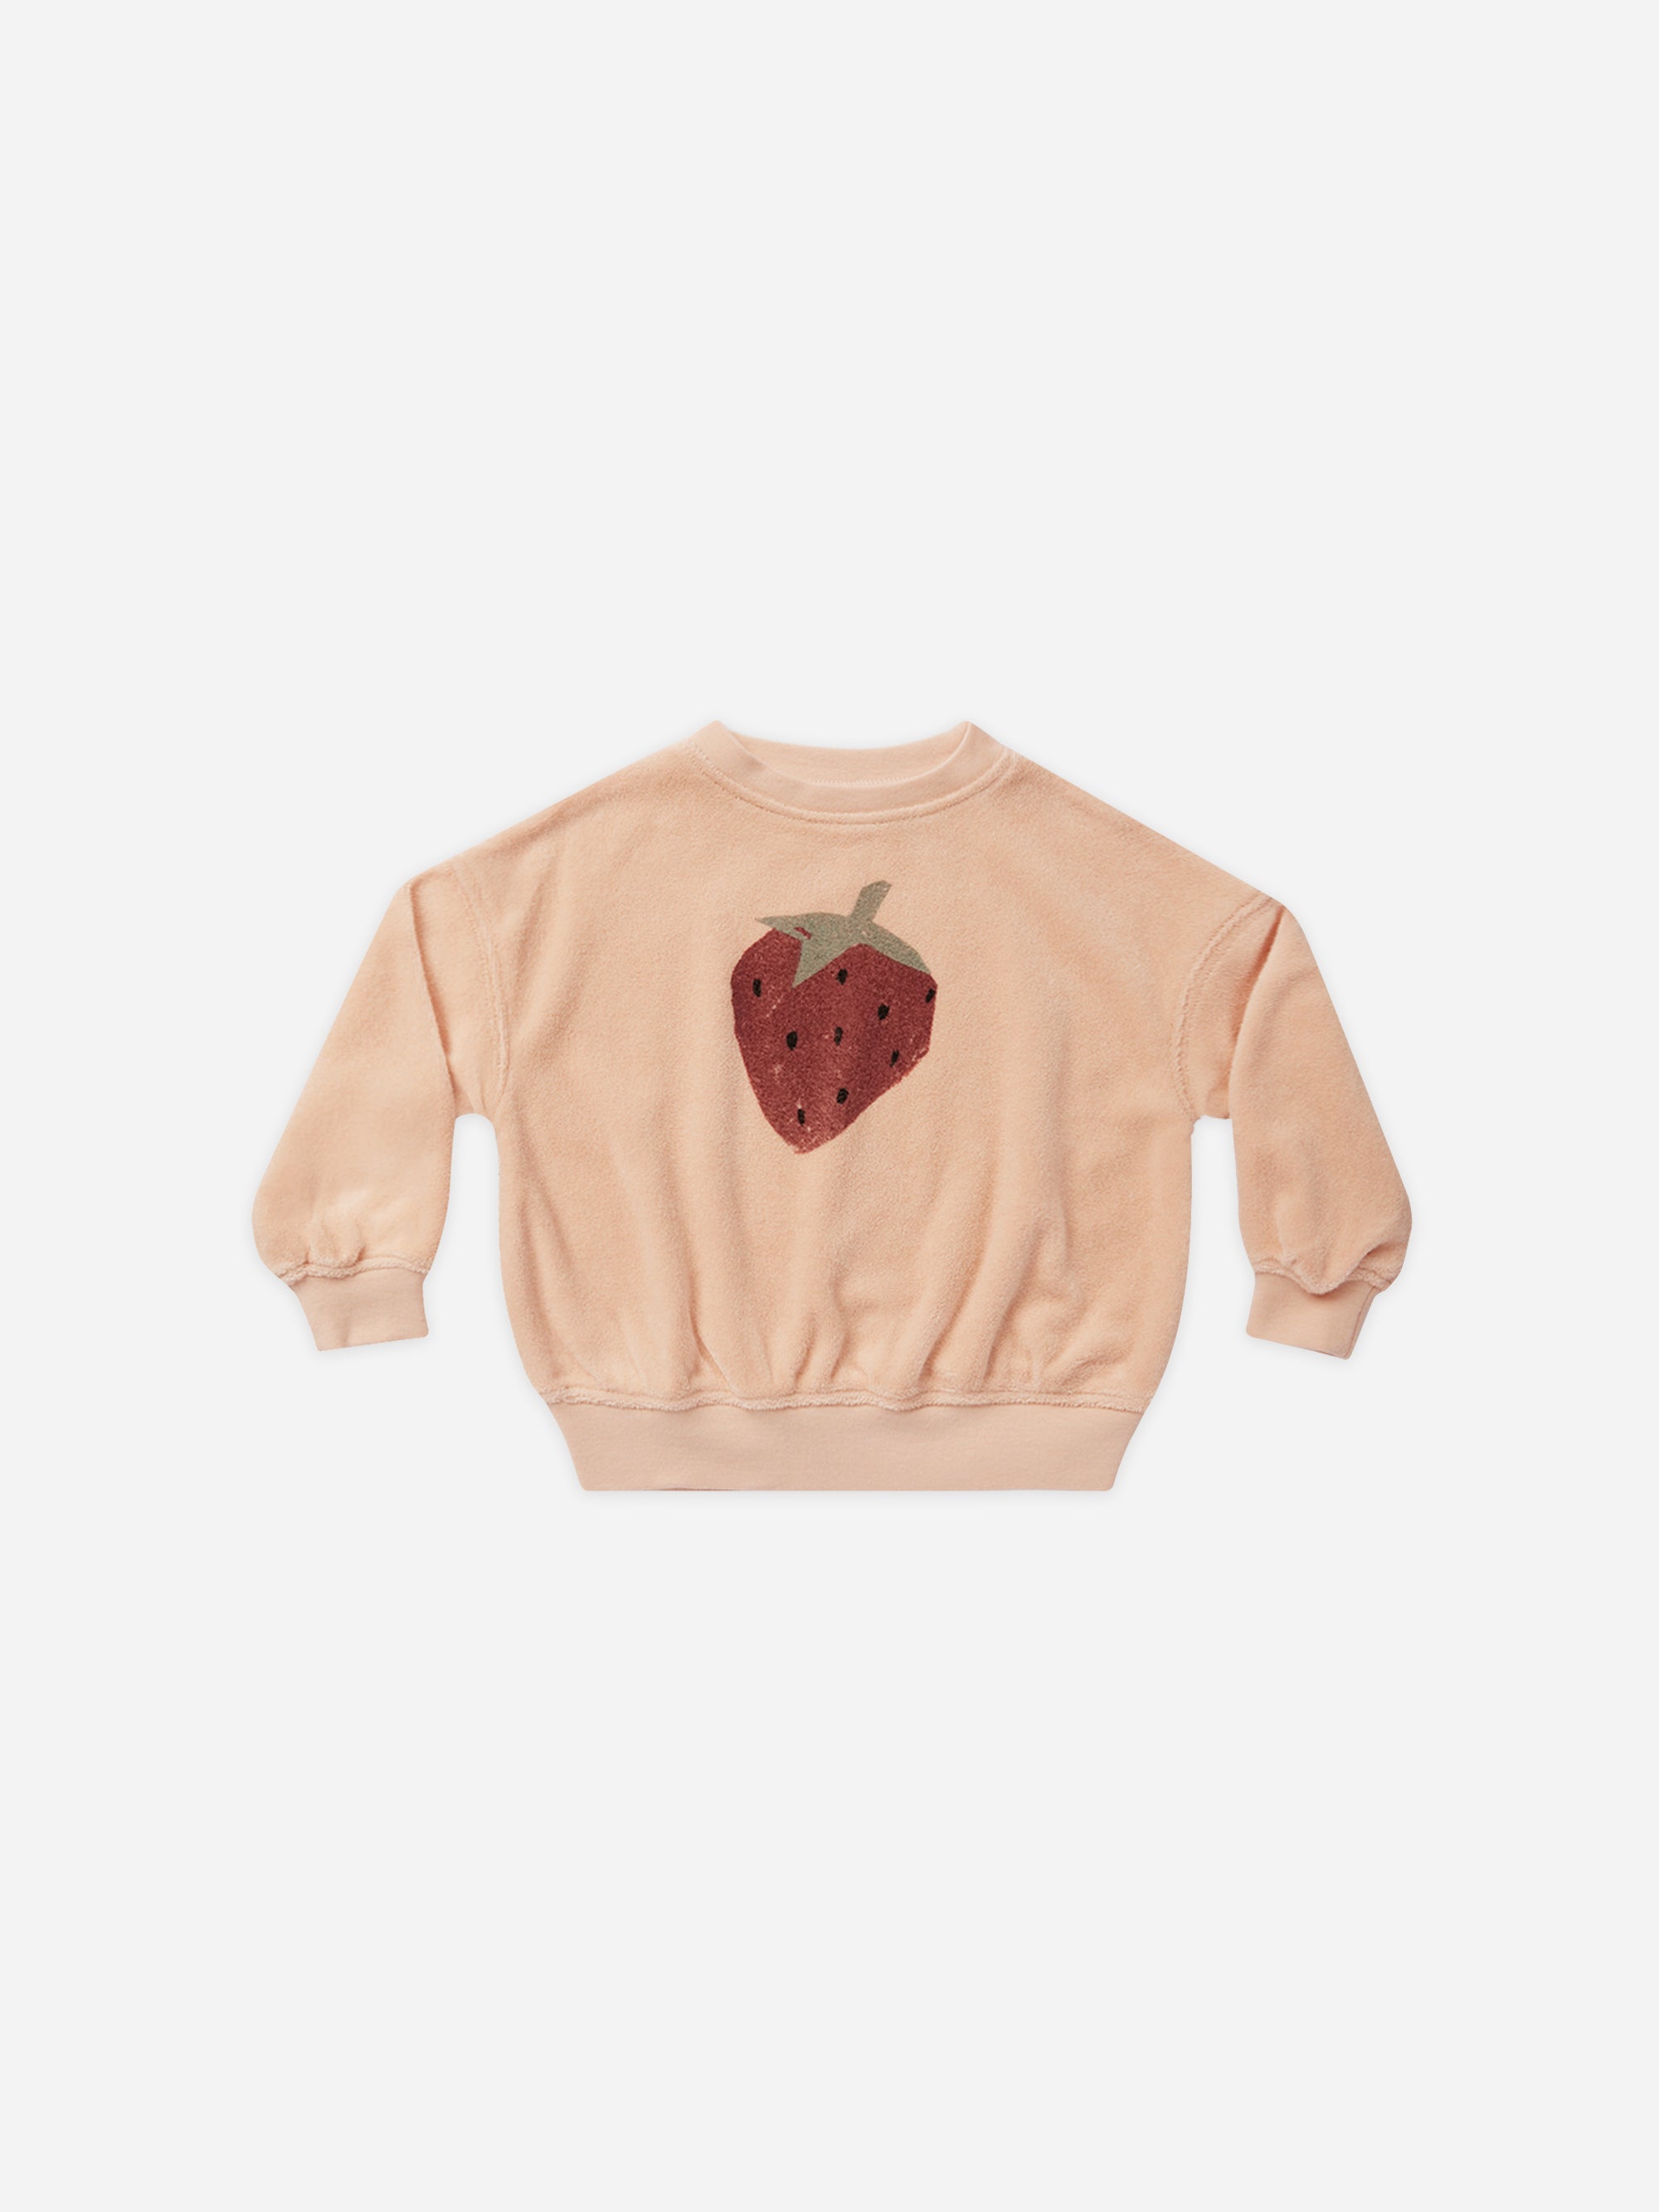 Sweatshirt || Strawberry - Rylee + Cru | Kids Clothes | Trendy Baby Clothes | Modern Infant Outfits |